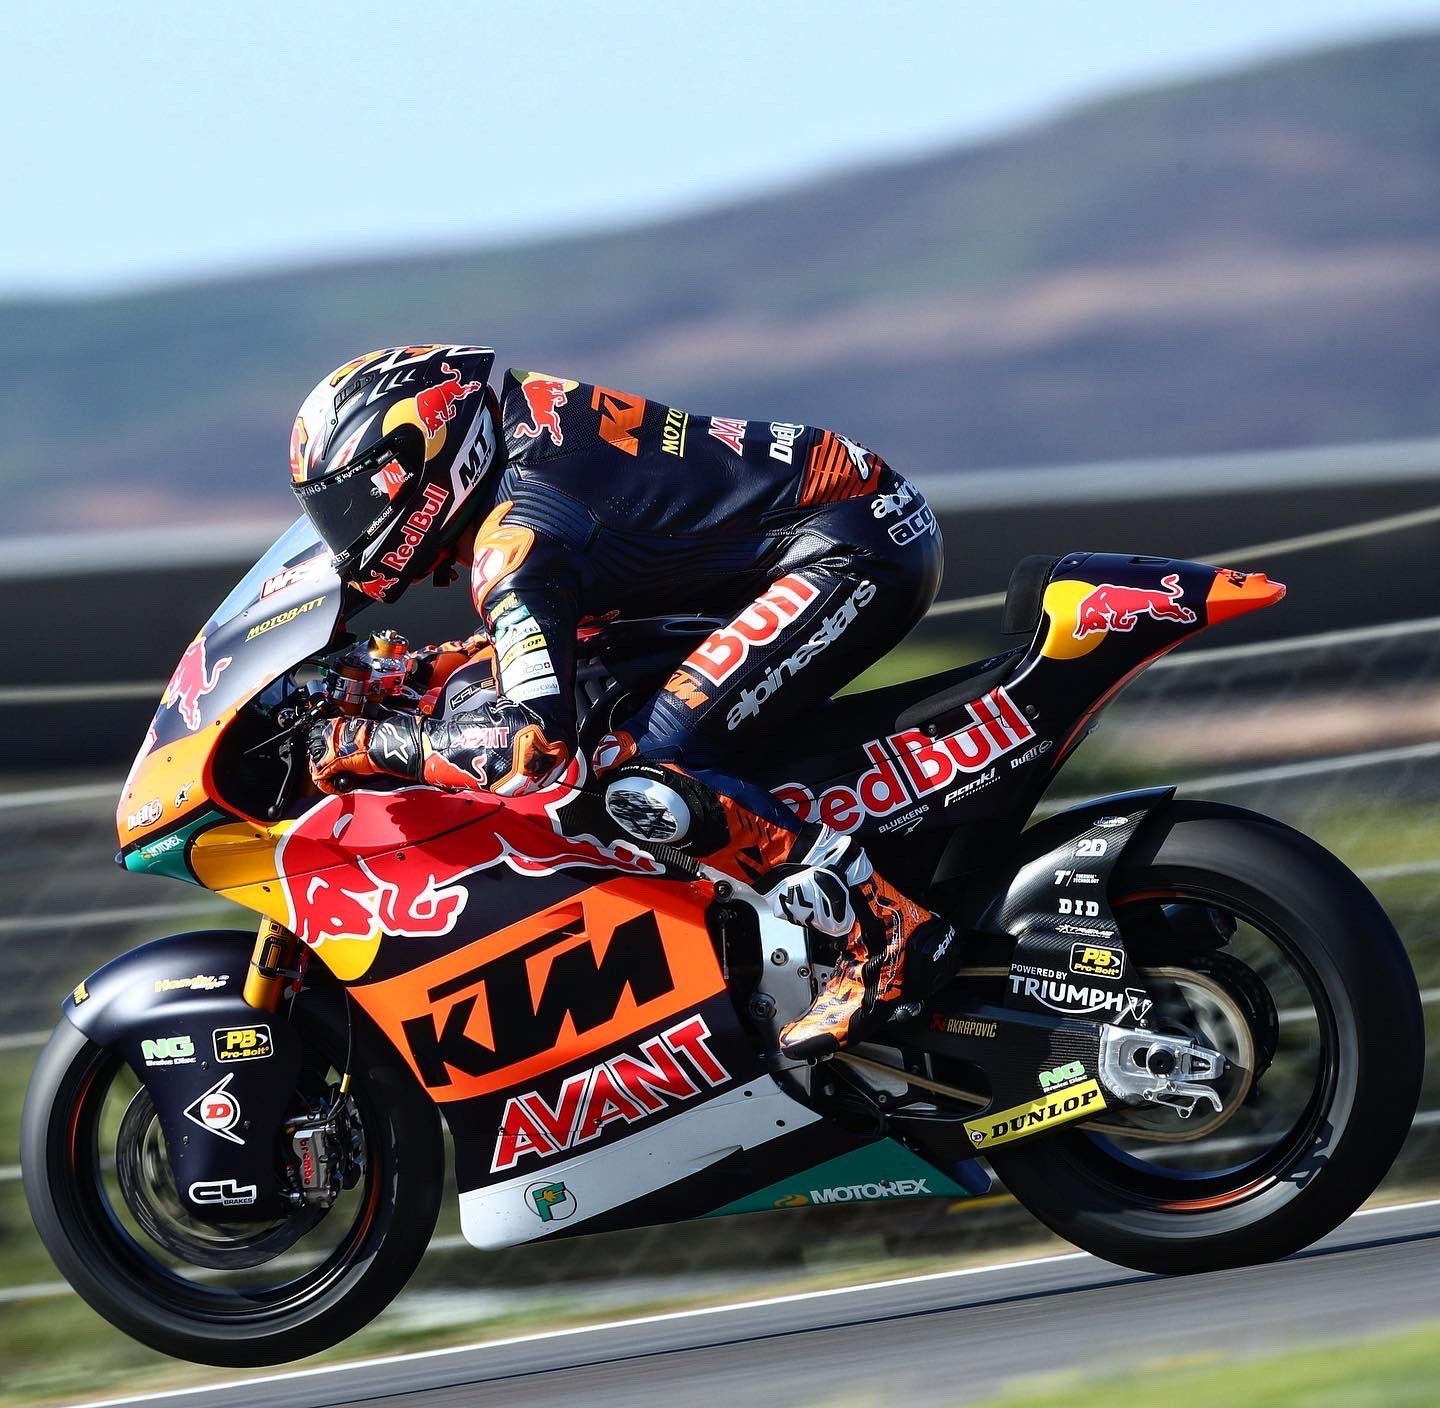 PEDRO ACOSTA IS THE PICK OF THE ALPINESTARS RIDERS AT MOTO2 TEST AT PORTIMAO, PORTUGAL